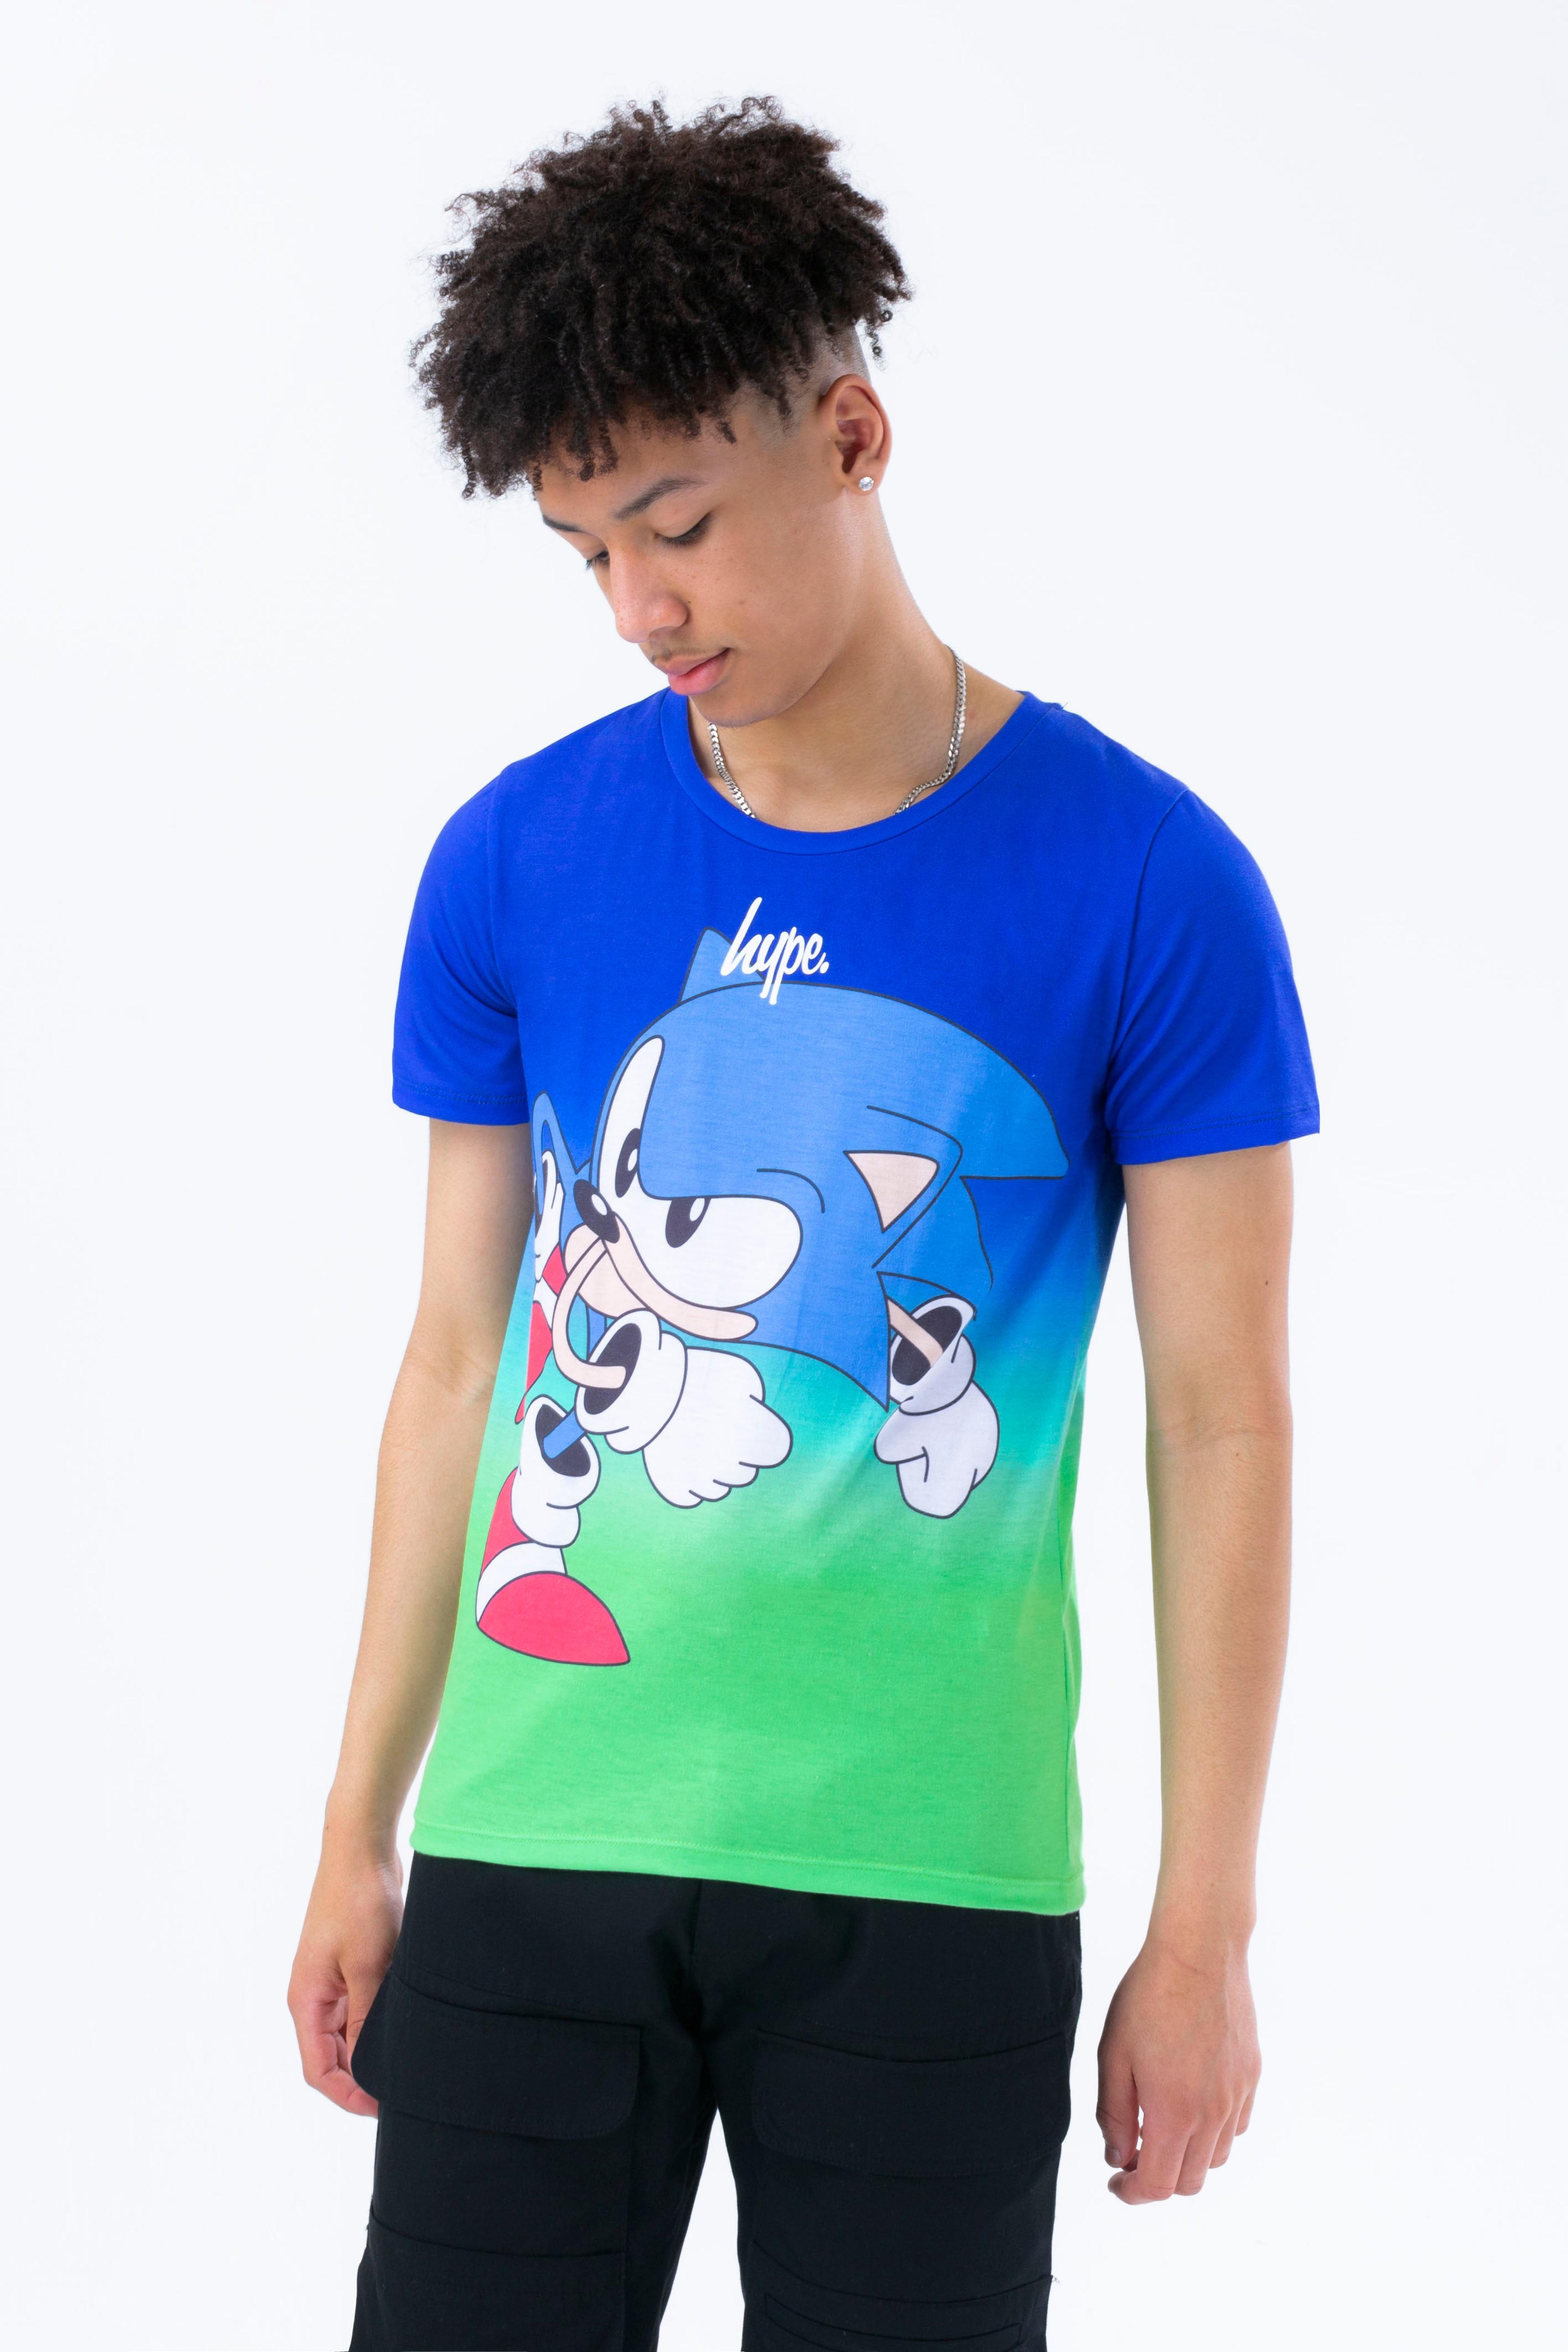 HYPE X SONIC KIDS GREEN AND BLUE FADE SONIC T-SHIRT